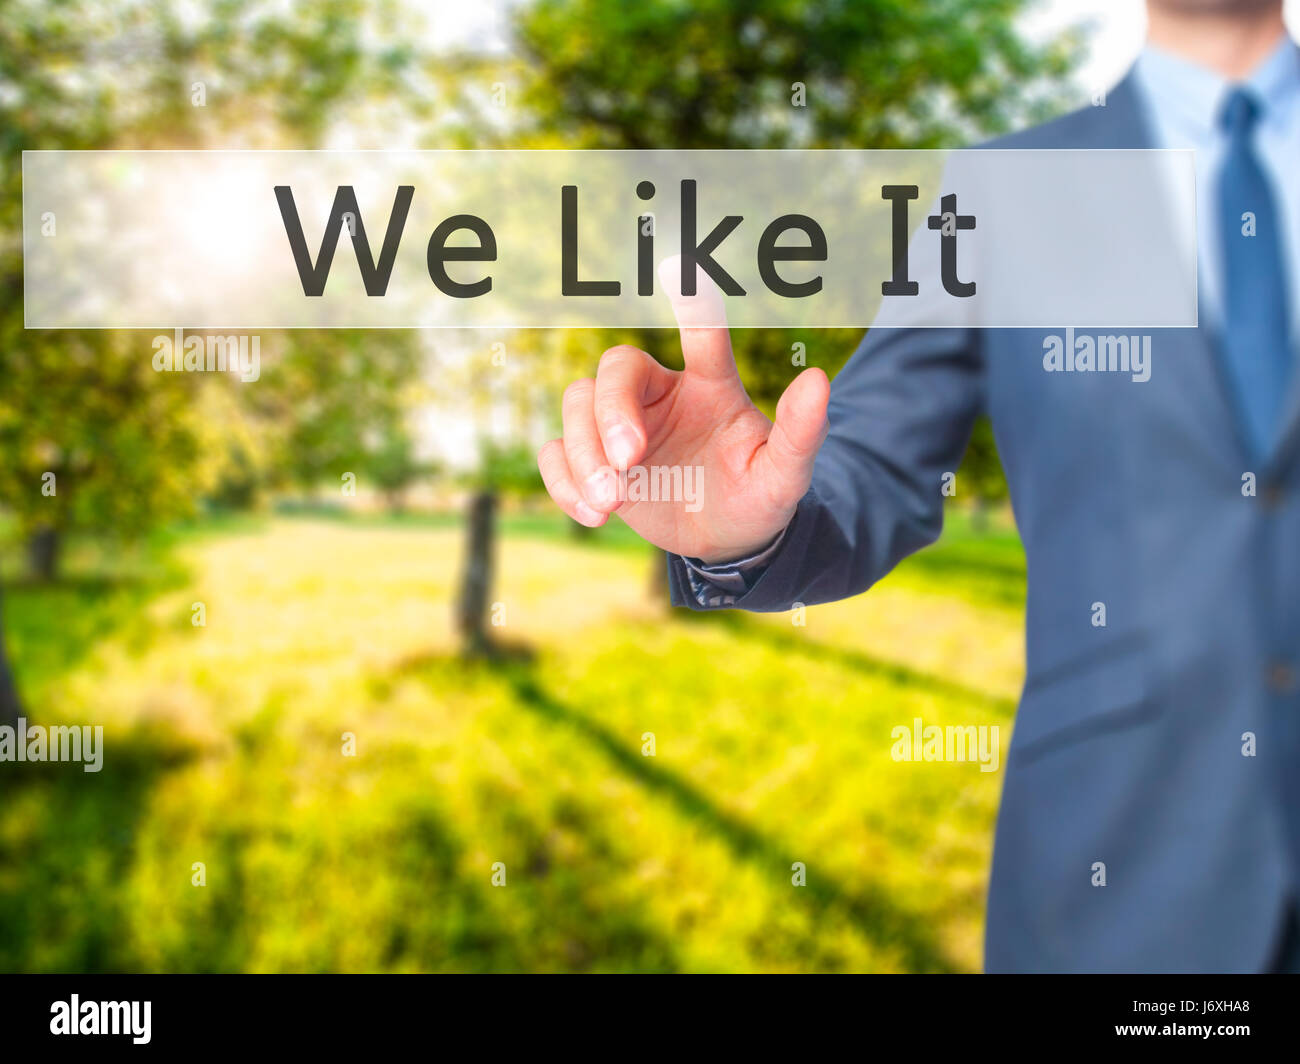 We Like It - Businessman hand pressing button on touch screen interface. Business, technology, internet concept. Stock Photo Stock Photo